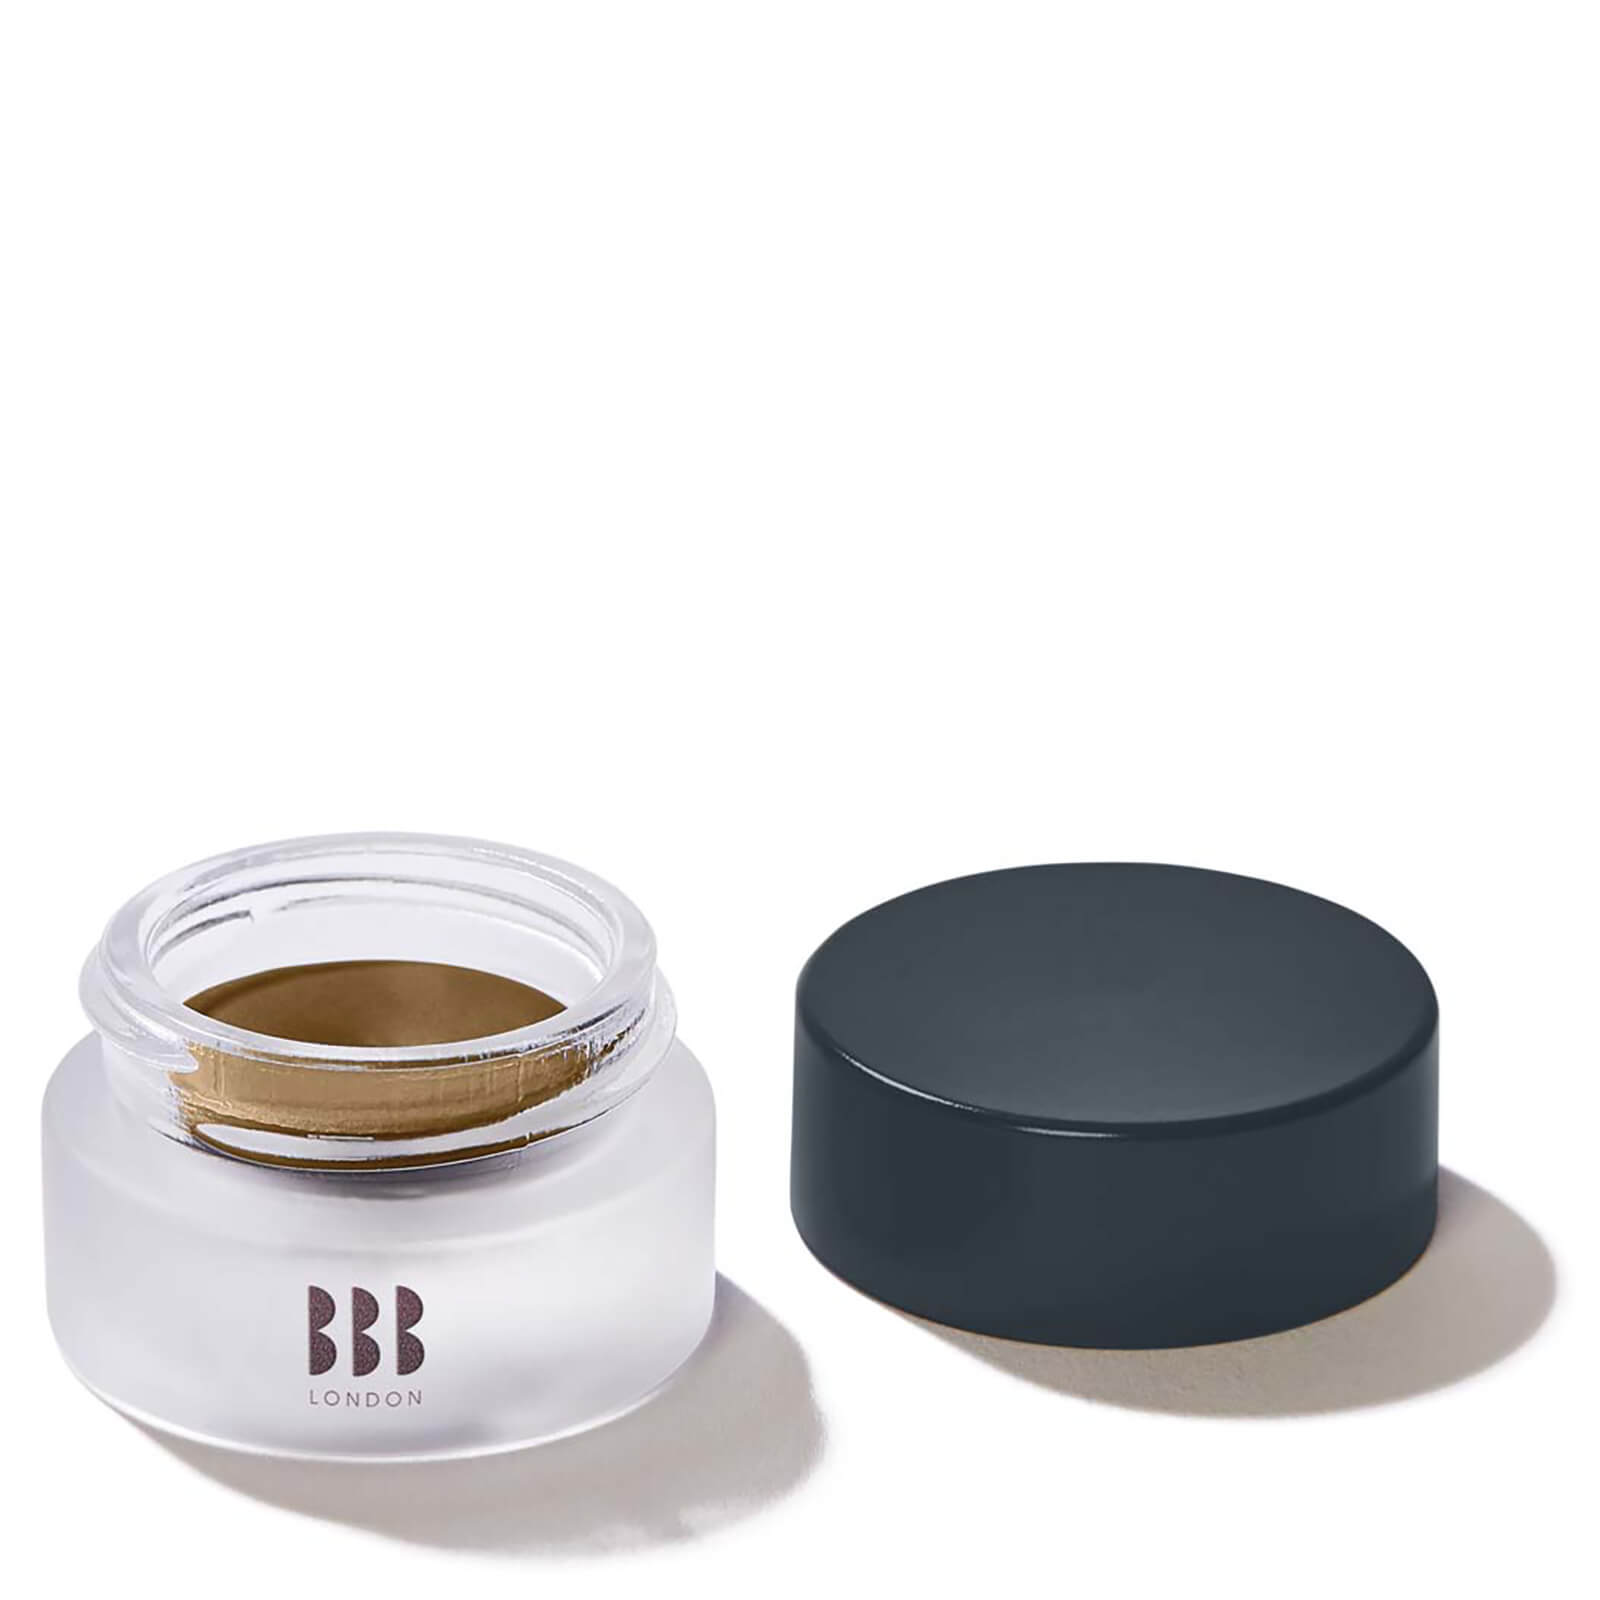 BBB London Brow Sculpting Pomade 4g (Various Shades) - Indian Chocolate